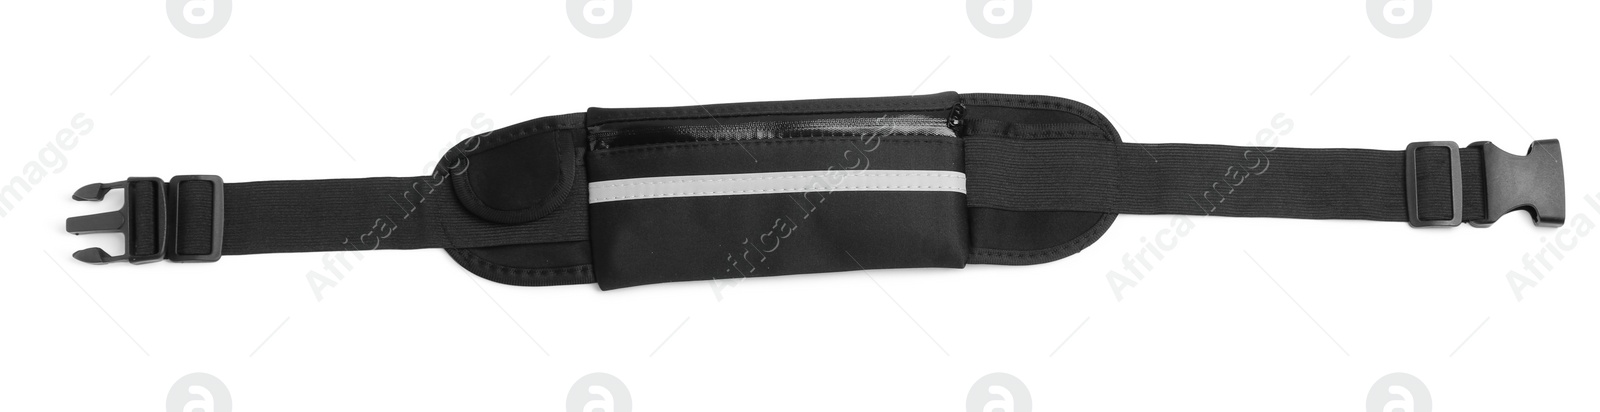 Photo of Stylish black waist bag isolated on white, top view